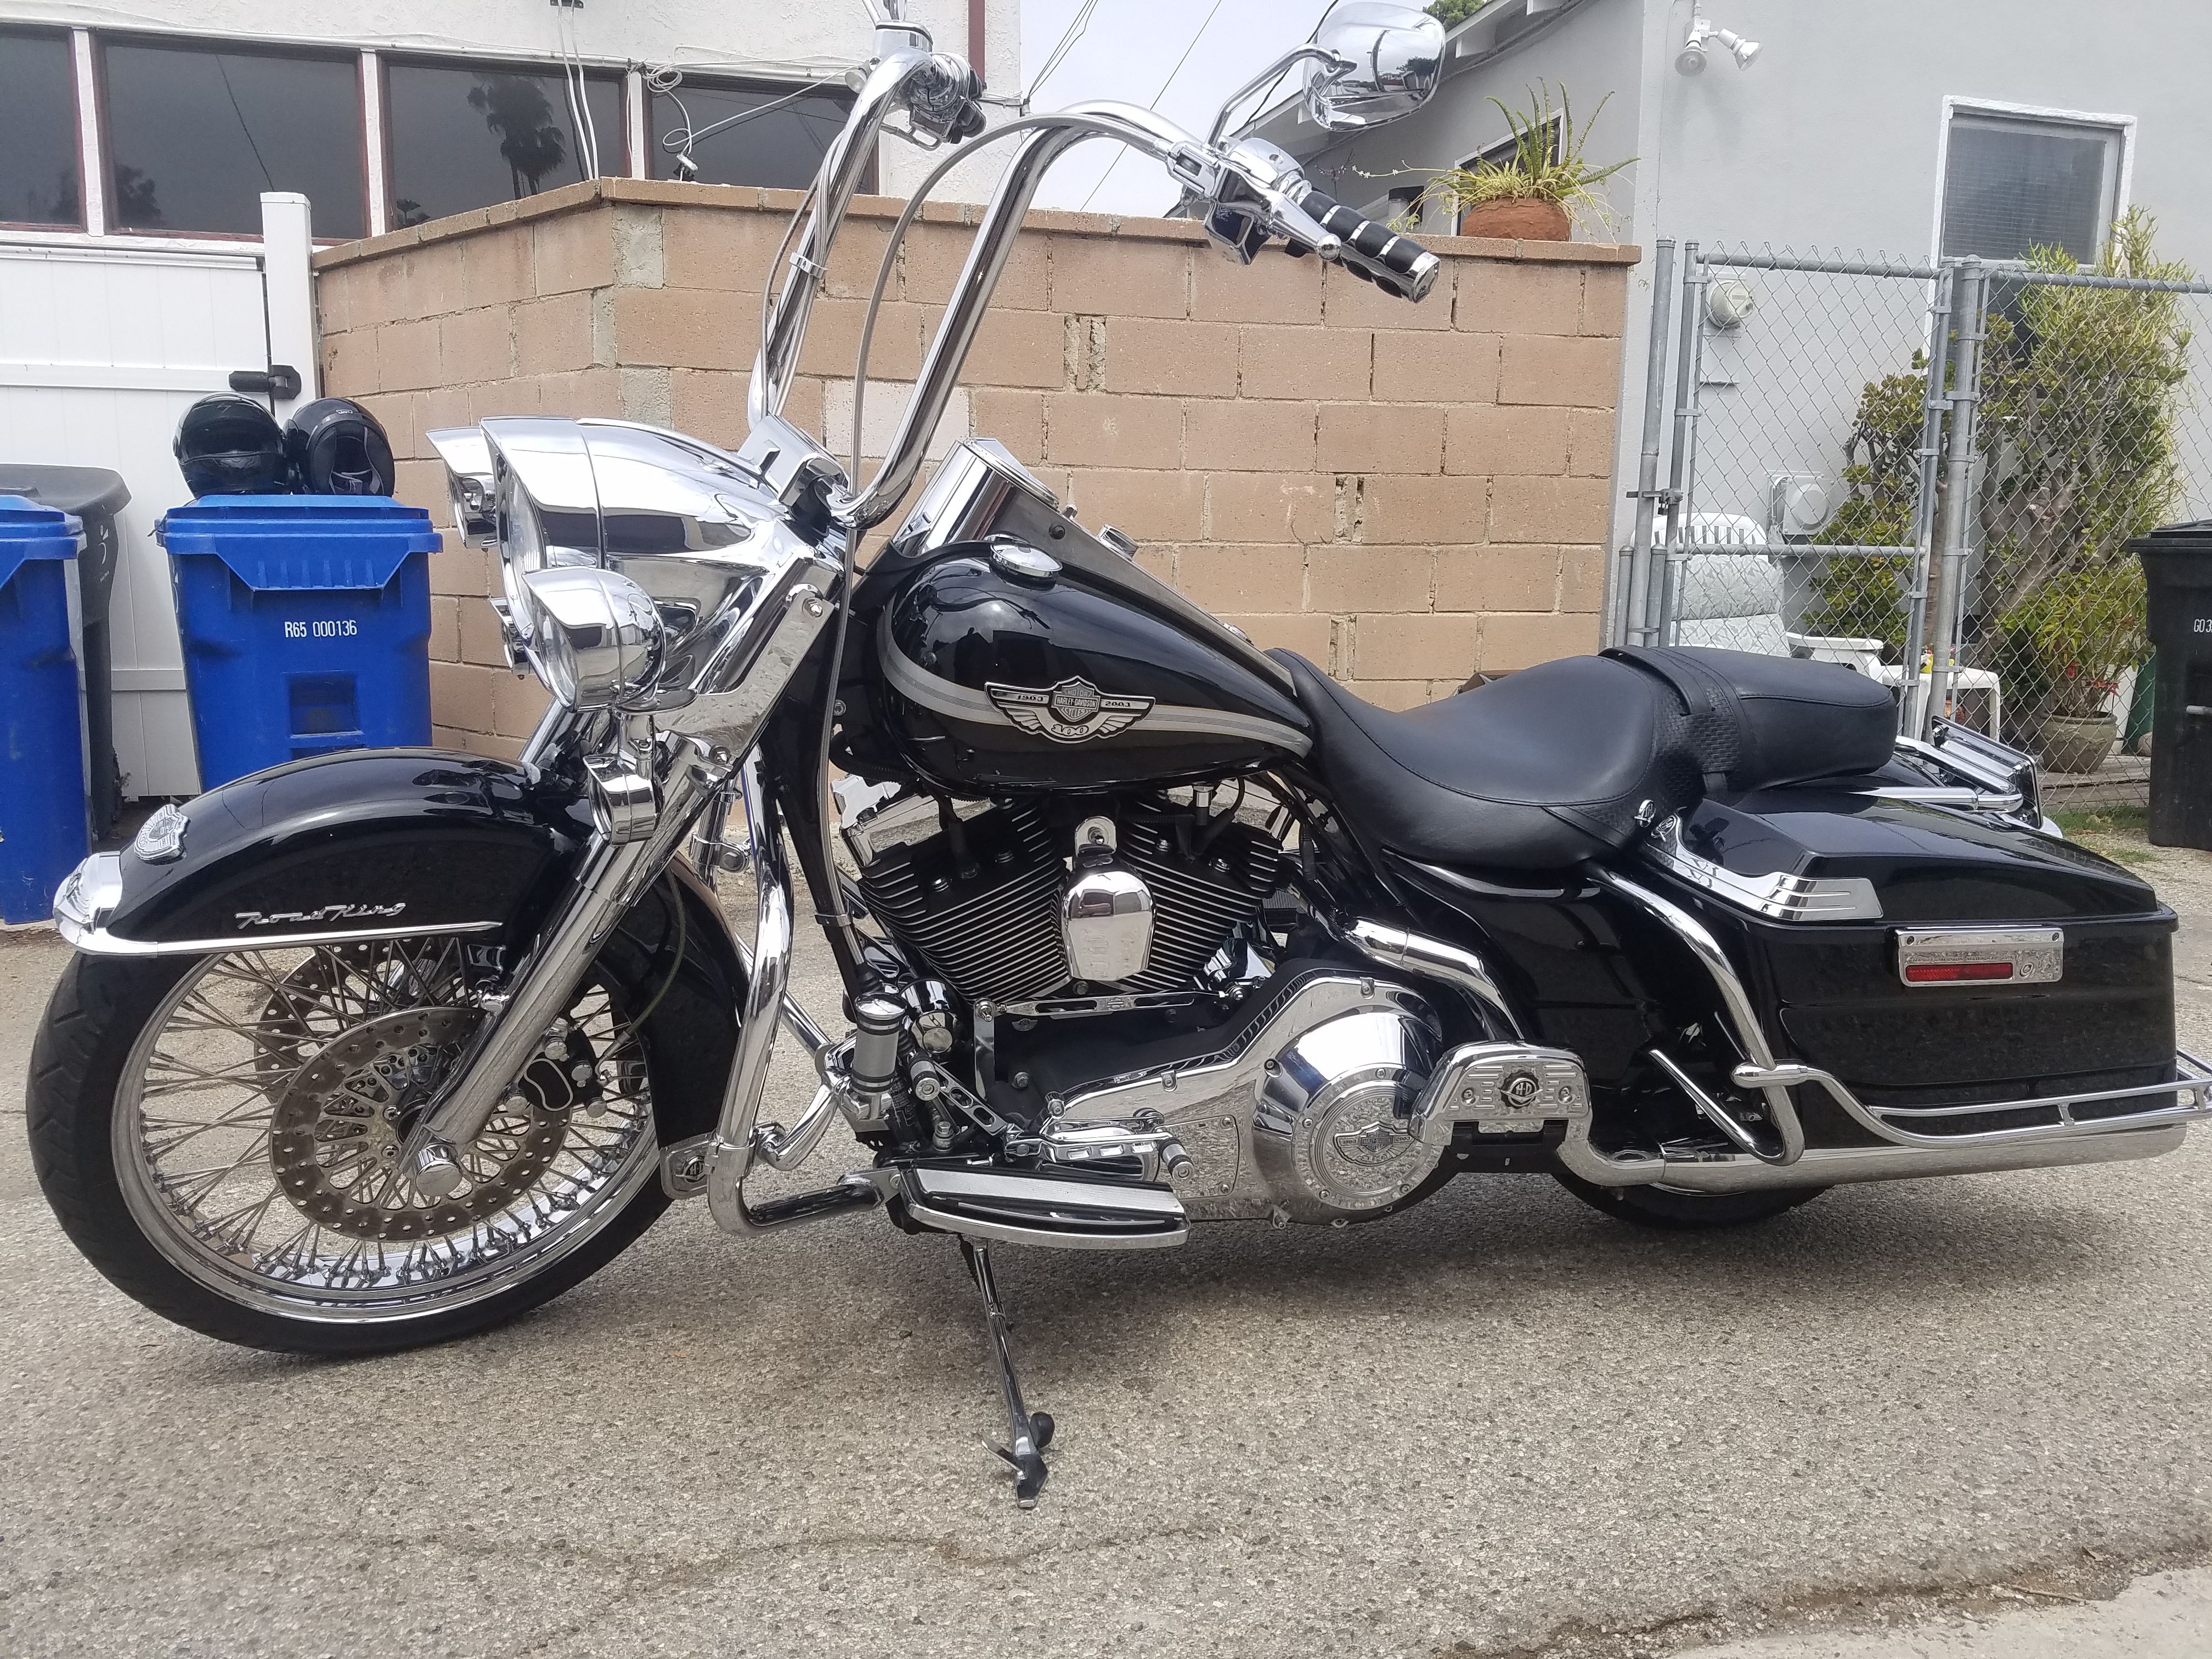 03 Harley Davidson Flhrci Road King Classic 100th Anniversary For Sale In Santa Monica Ca Offerup